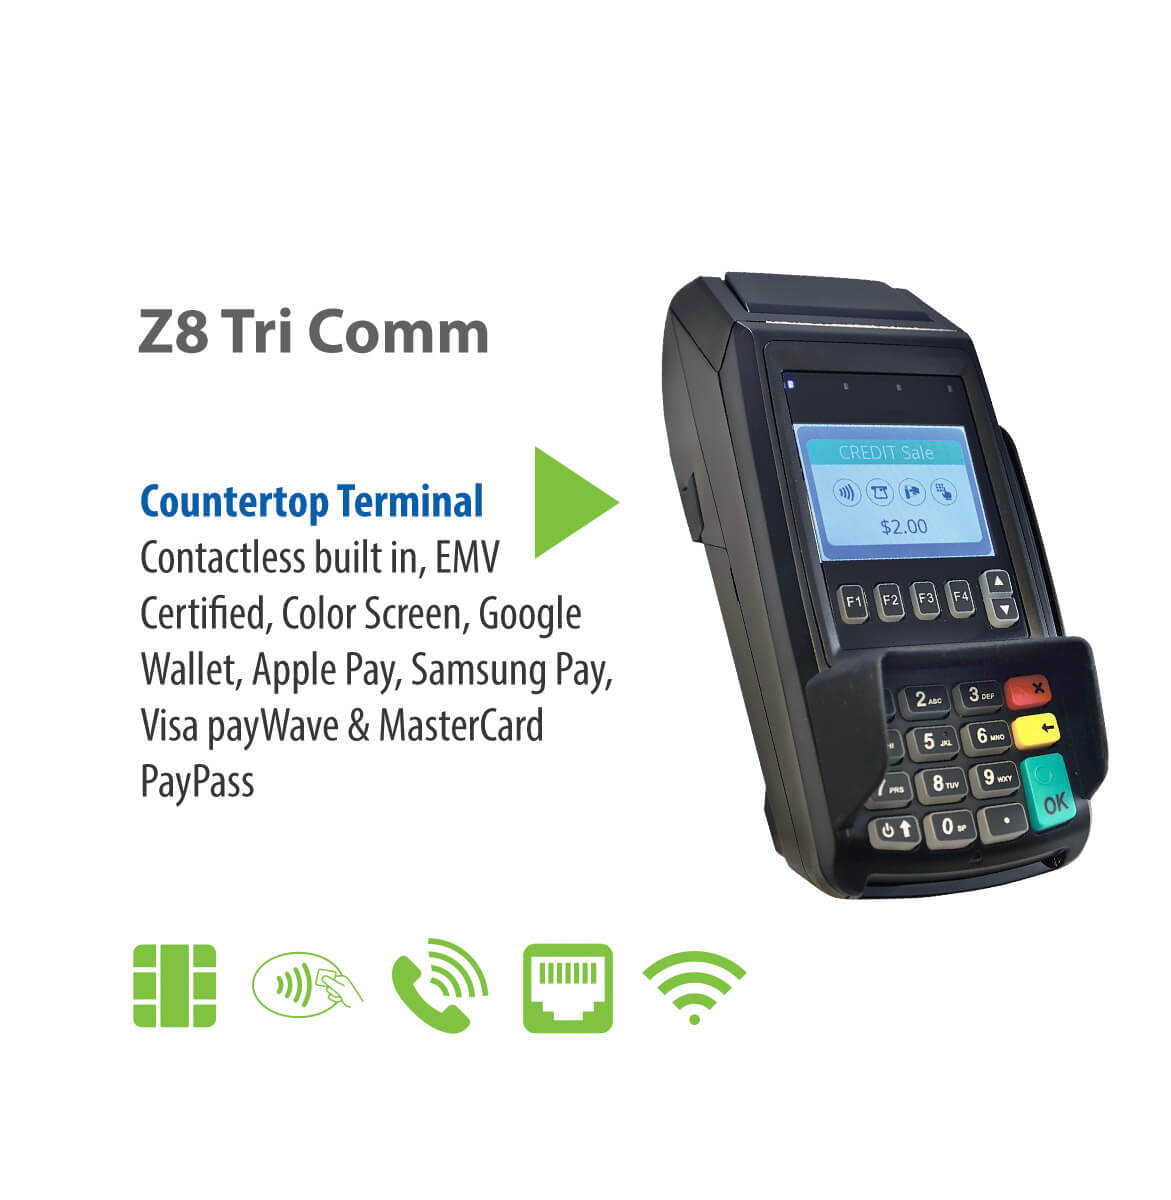 Z8 Tri Comm Countertop Terminal with Contactless built in, EMV Certified, Color Screen, Google Wallet, Apply Pay, Samsung Pay, Visa payWave & MasterCard PayPass